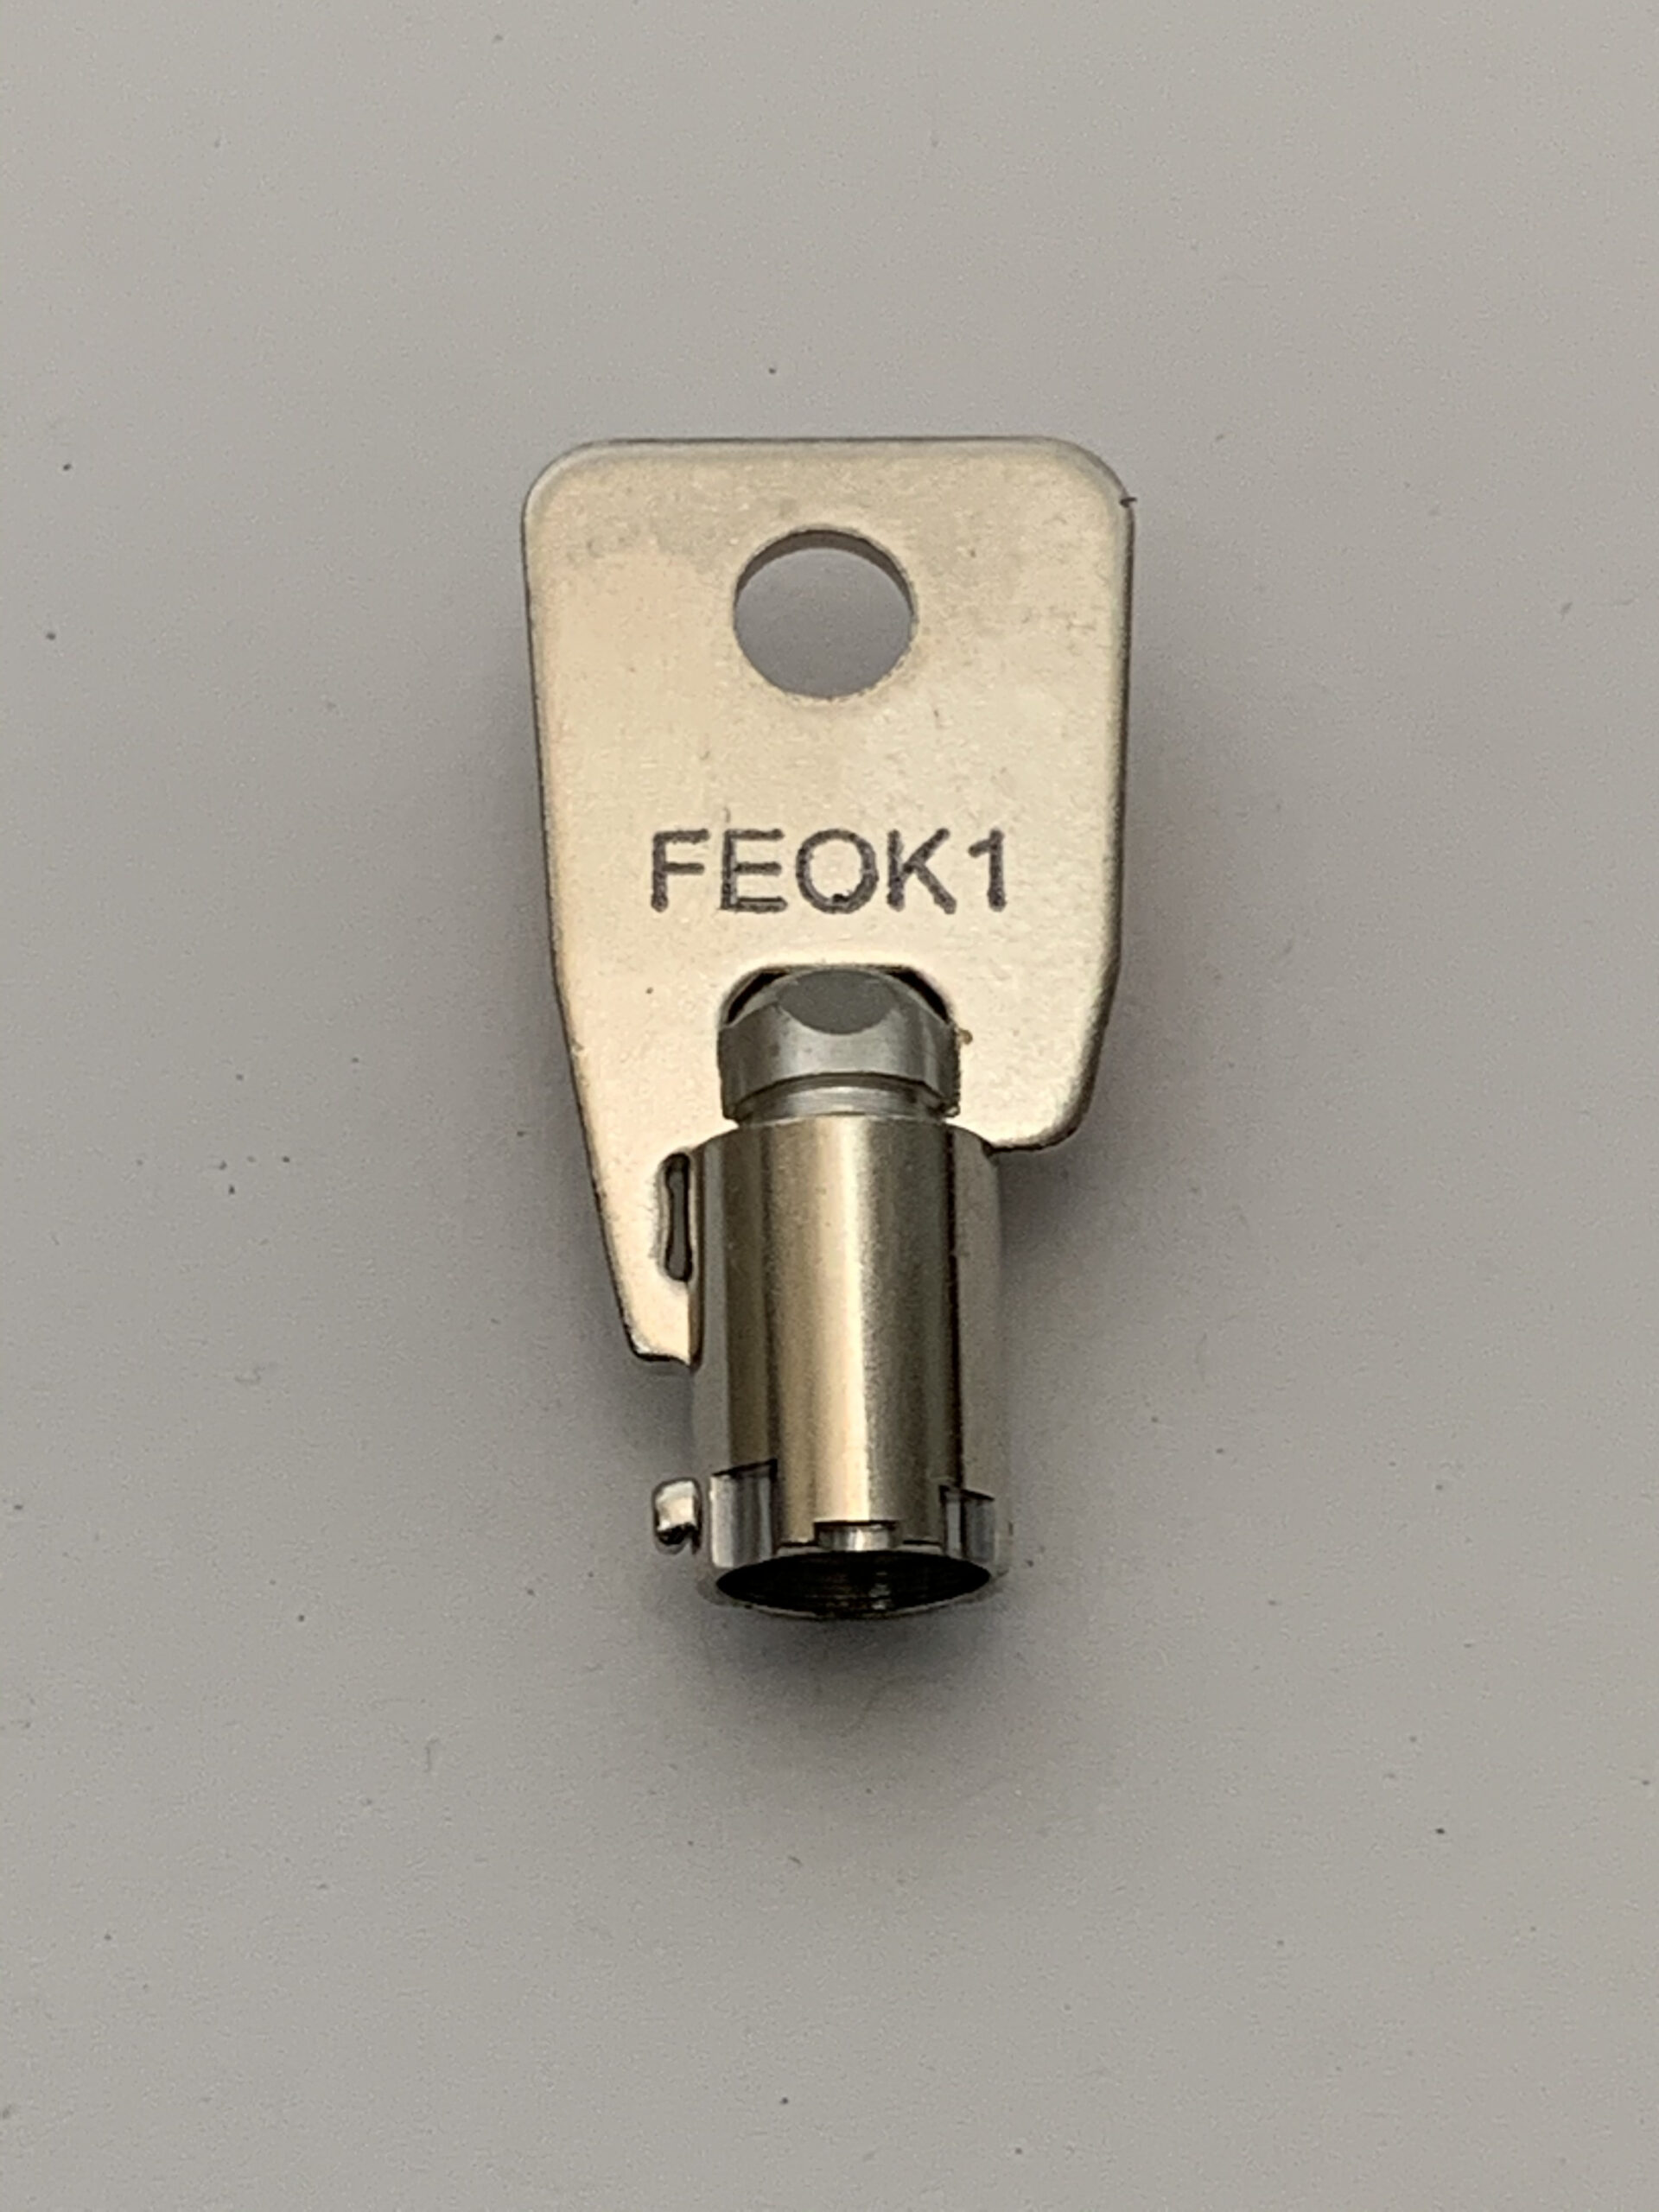 FEO-K1 key with the text "FEOK1" engraved on the head